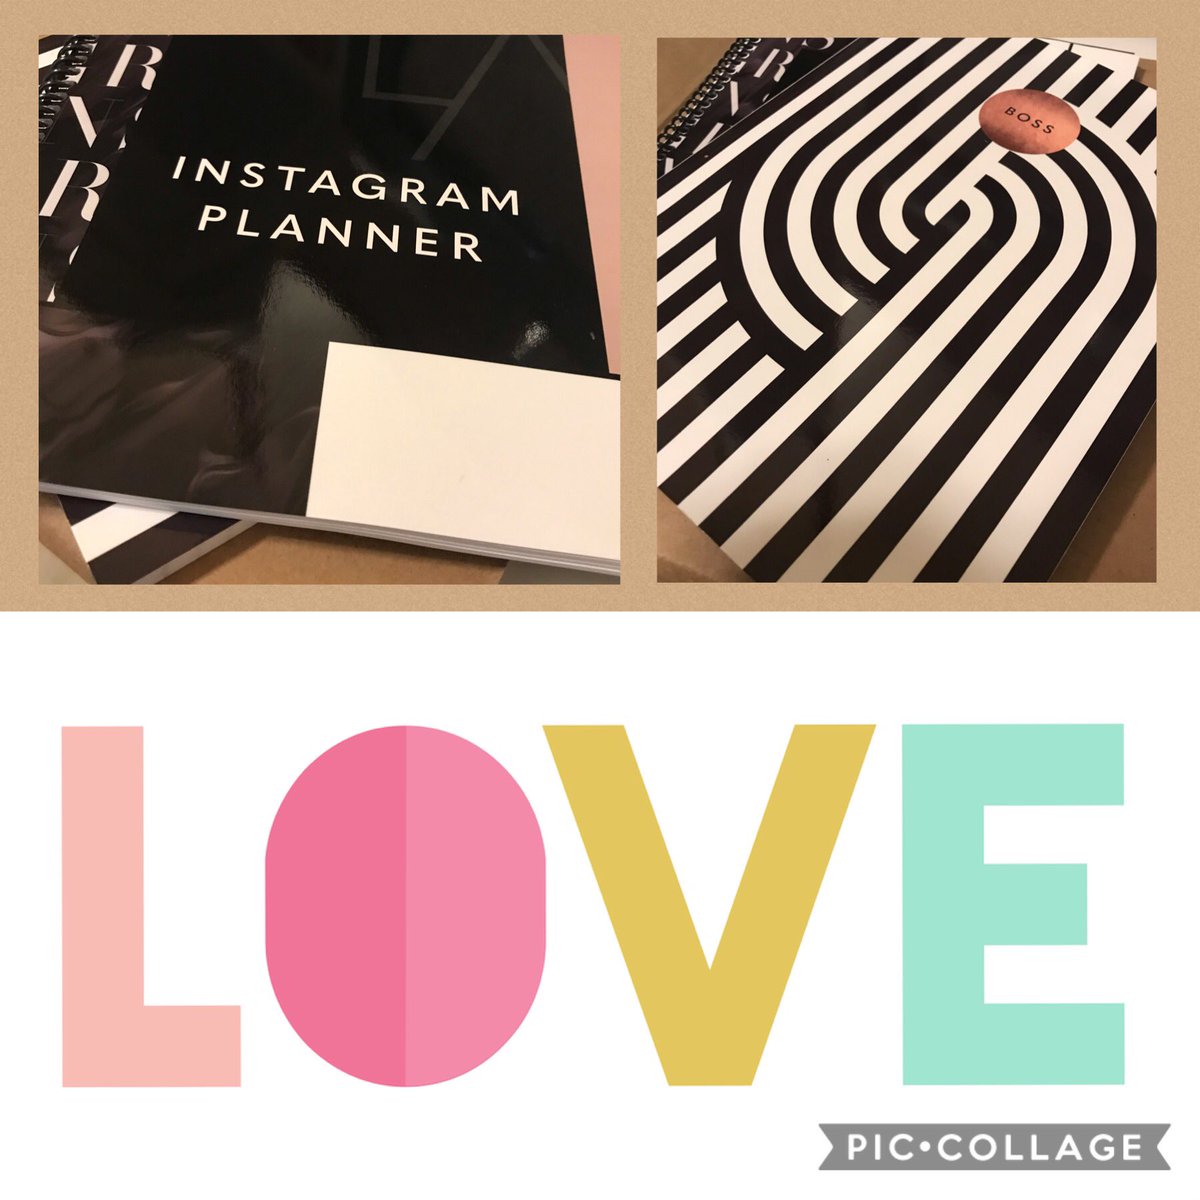 @ShopLovetAgency new merch just came in and I am so excited to begin my #instagramplanner get urs in time for the holidays. ‘Its the season to be a giver. Start with @ShopLovetAgency #planners #pages #lines #journal #businesswoman #goodhabits #wellness #bossmom #visionboard